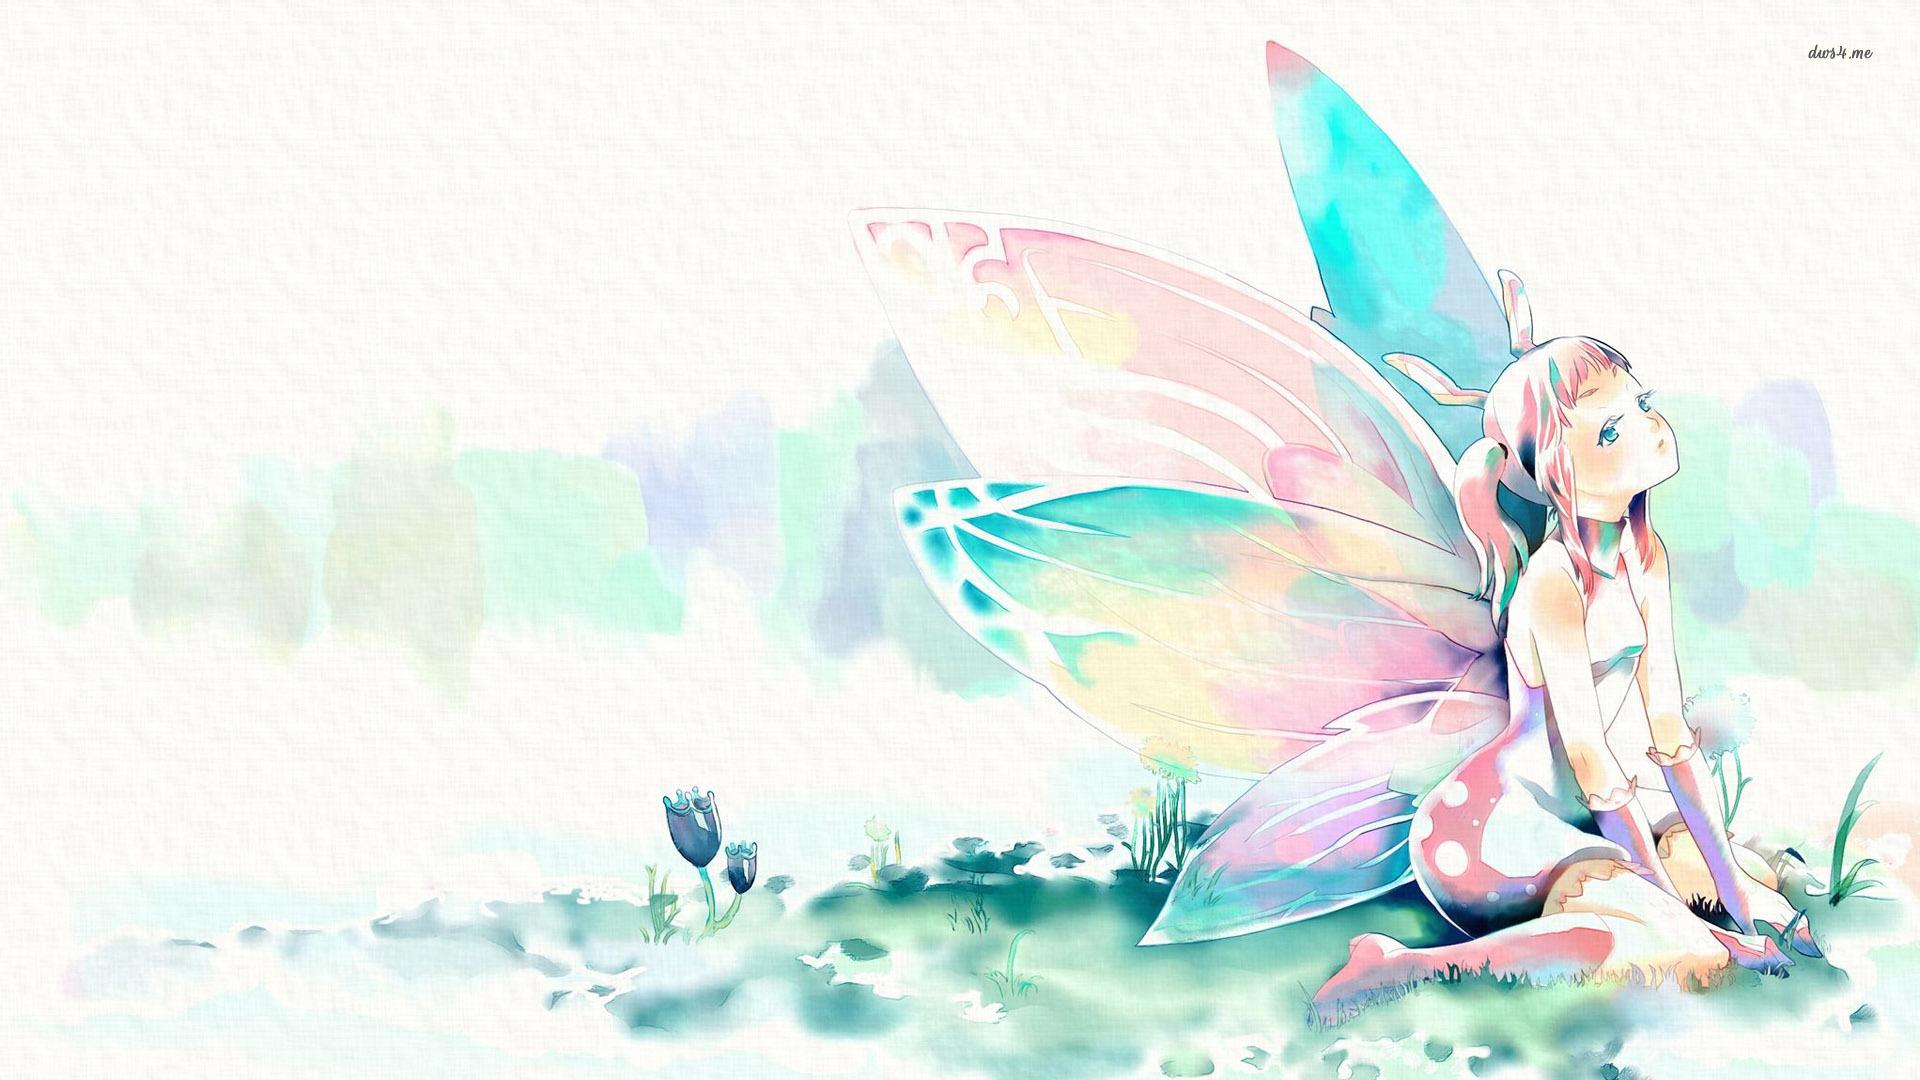 Small fairy with colorful wings on the grass wallpaper